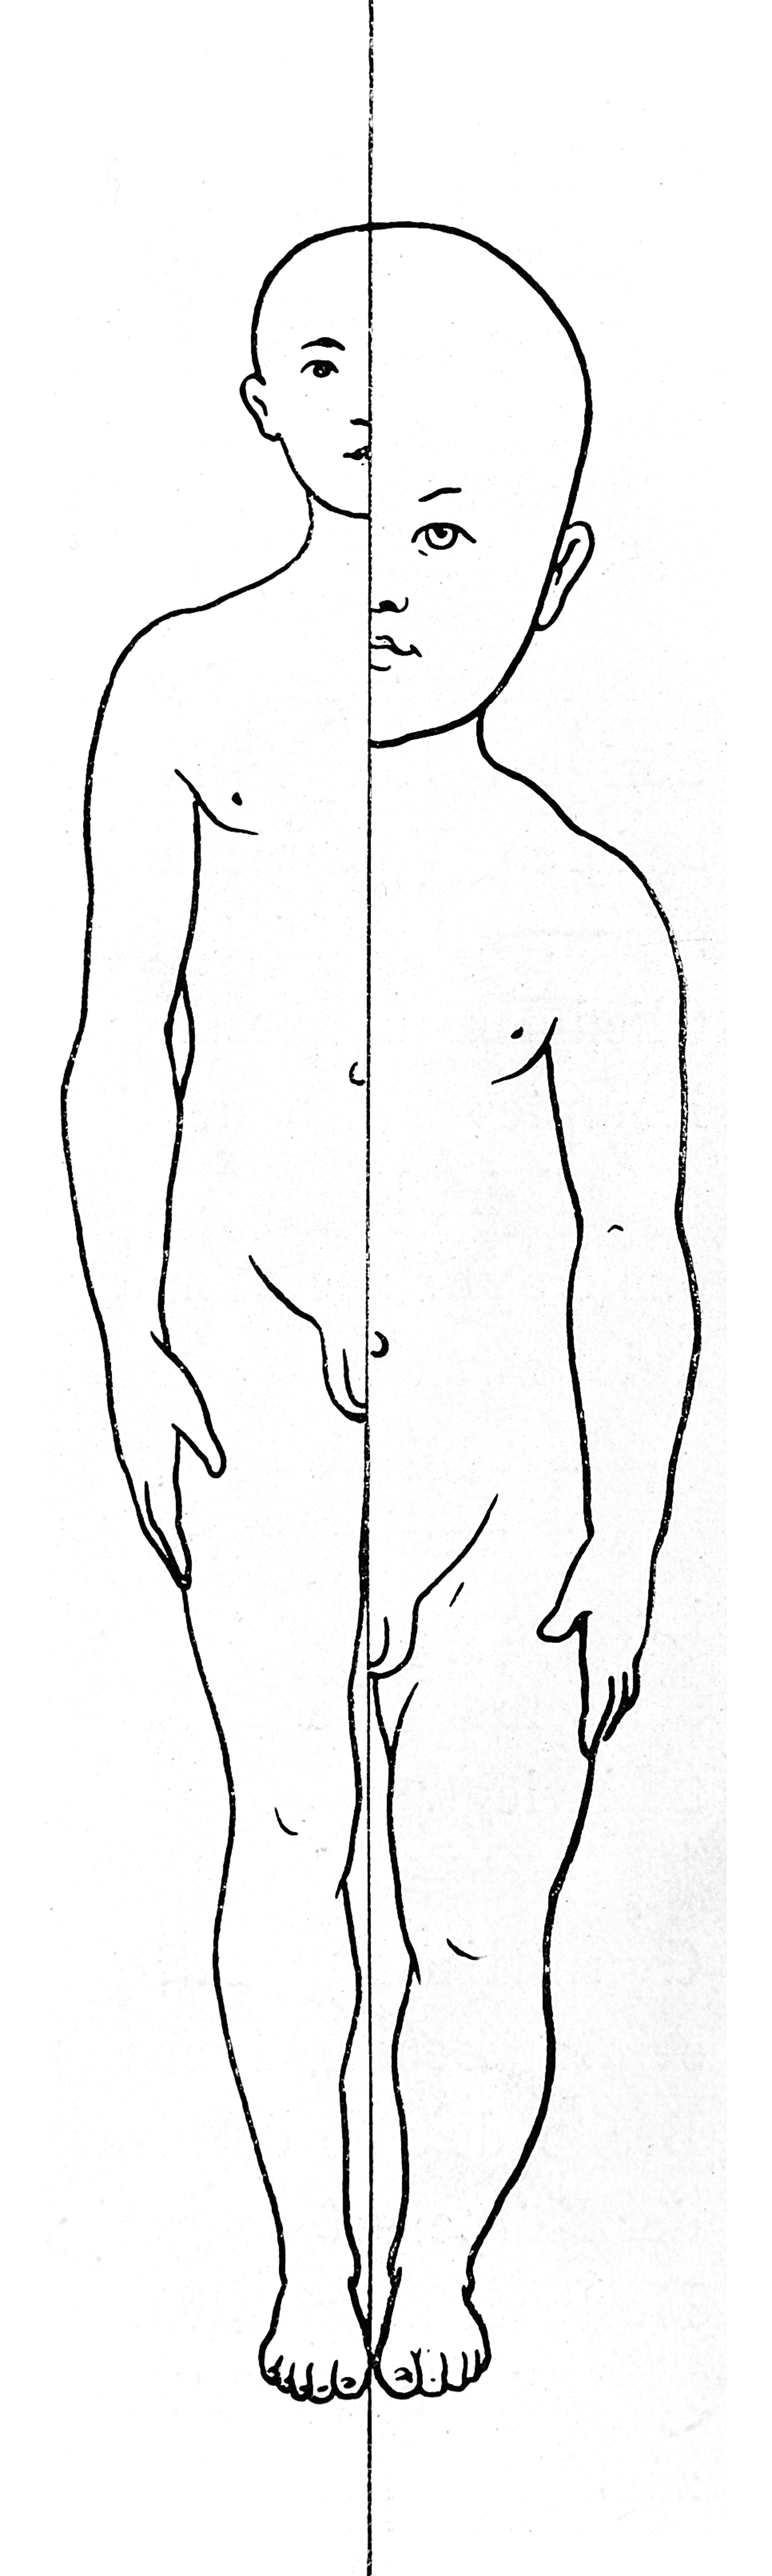 variation of proportion with age